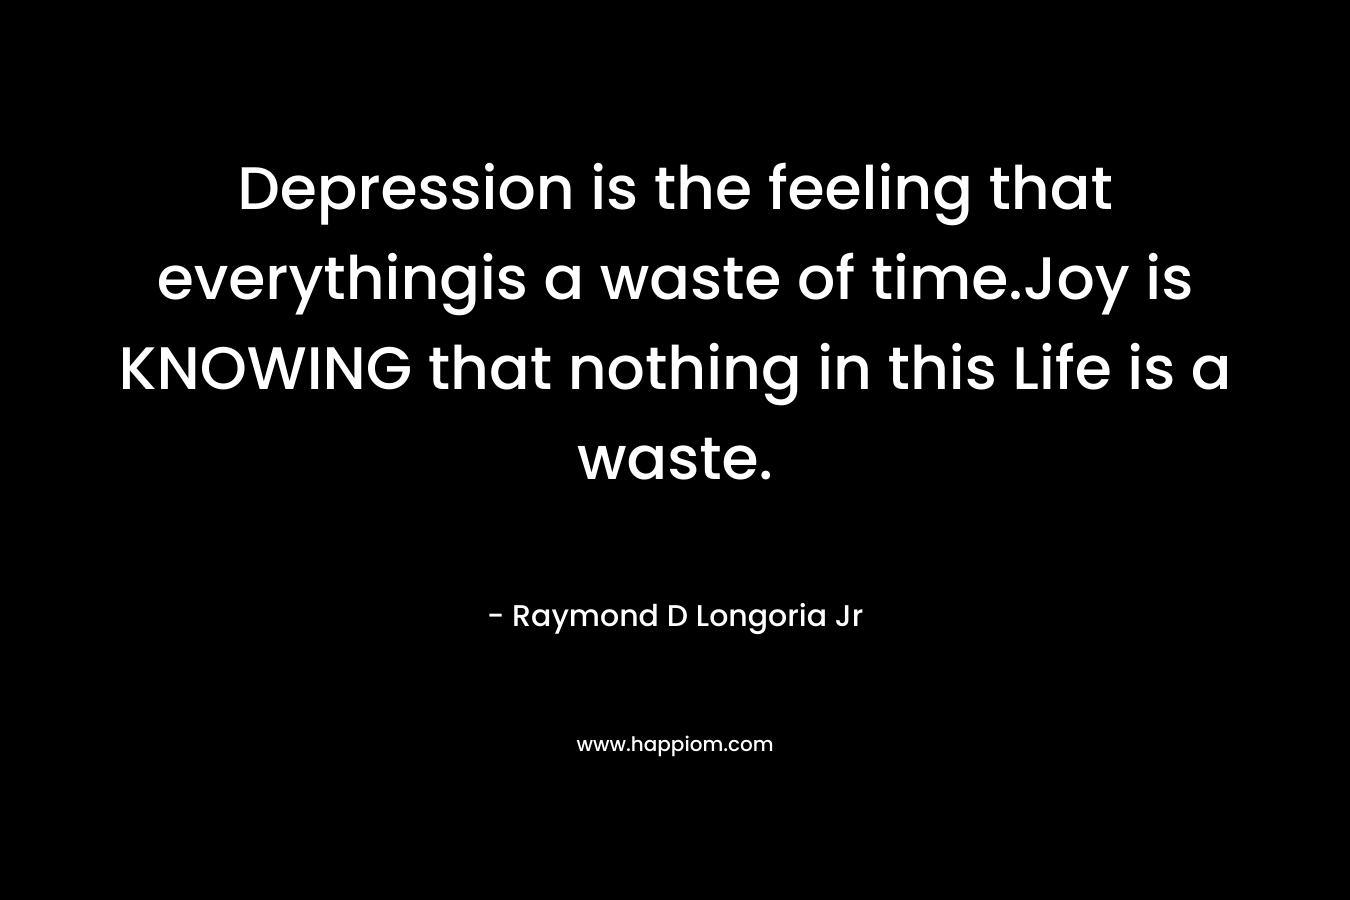 Depression is the feeling that everythingis a waste of time.Joy is KNOWING that nothing in this Life is a waste.